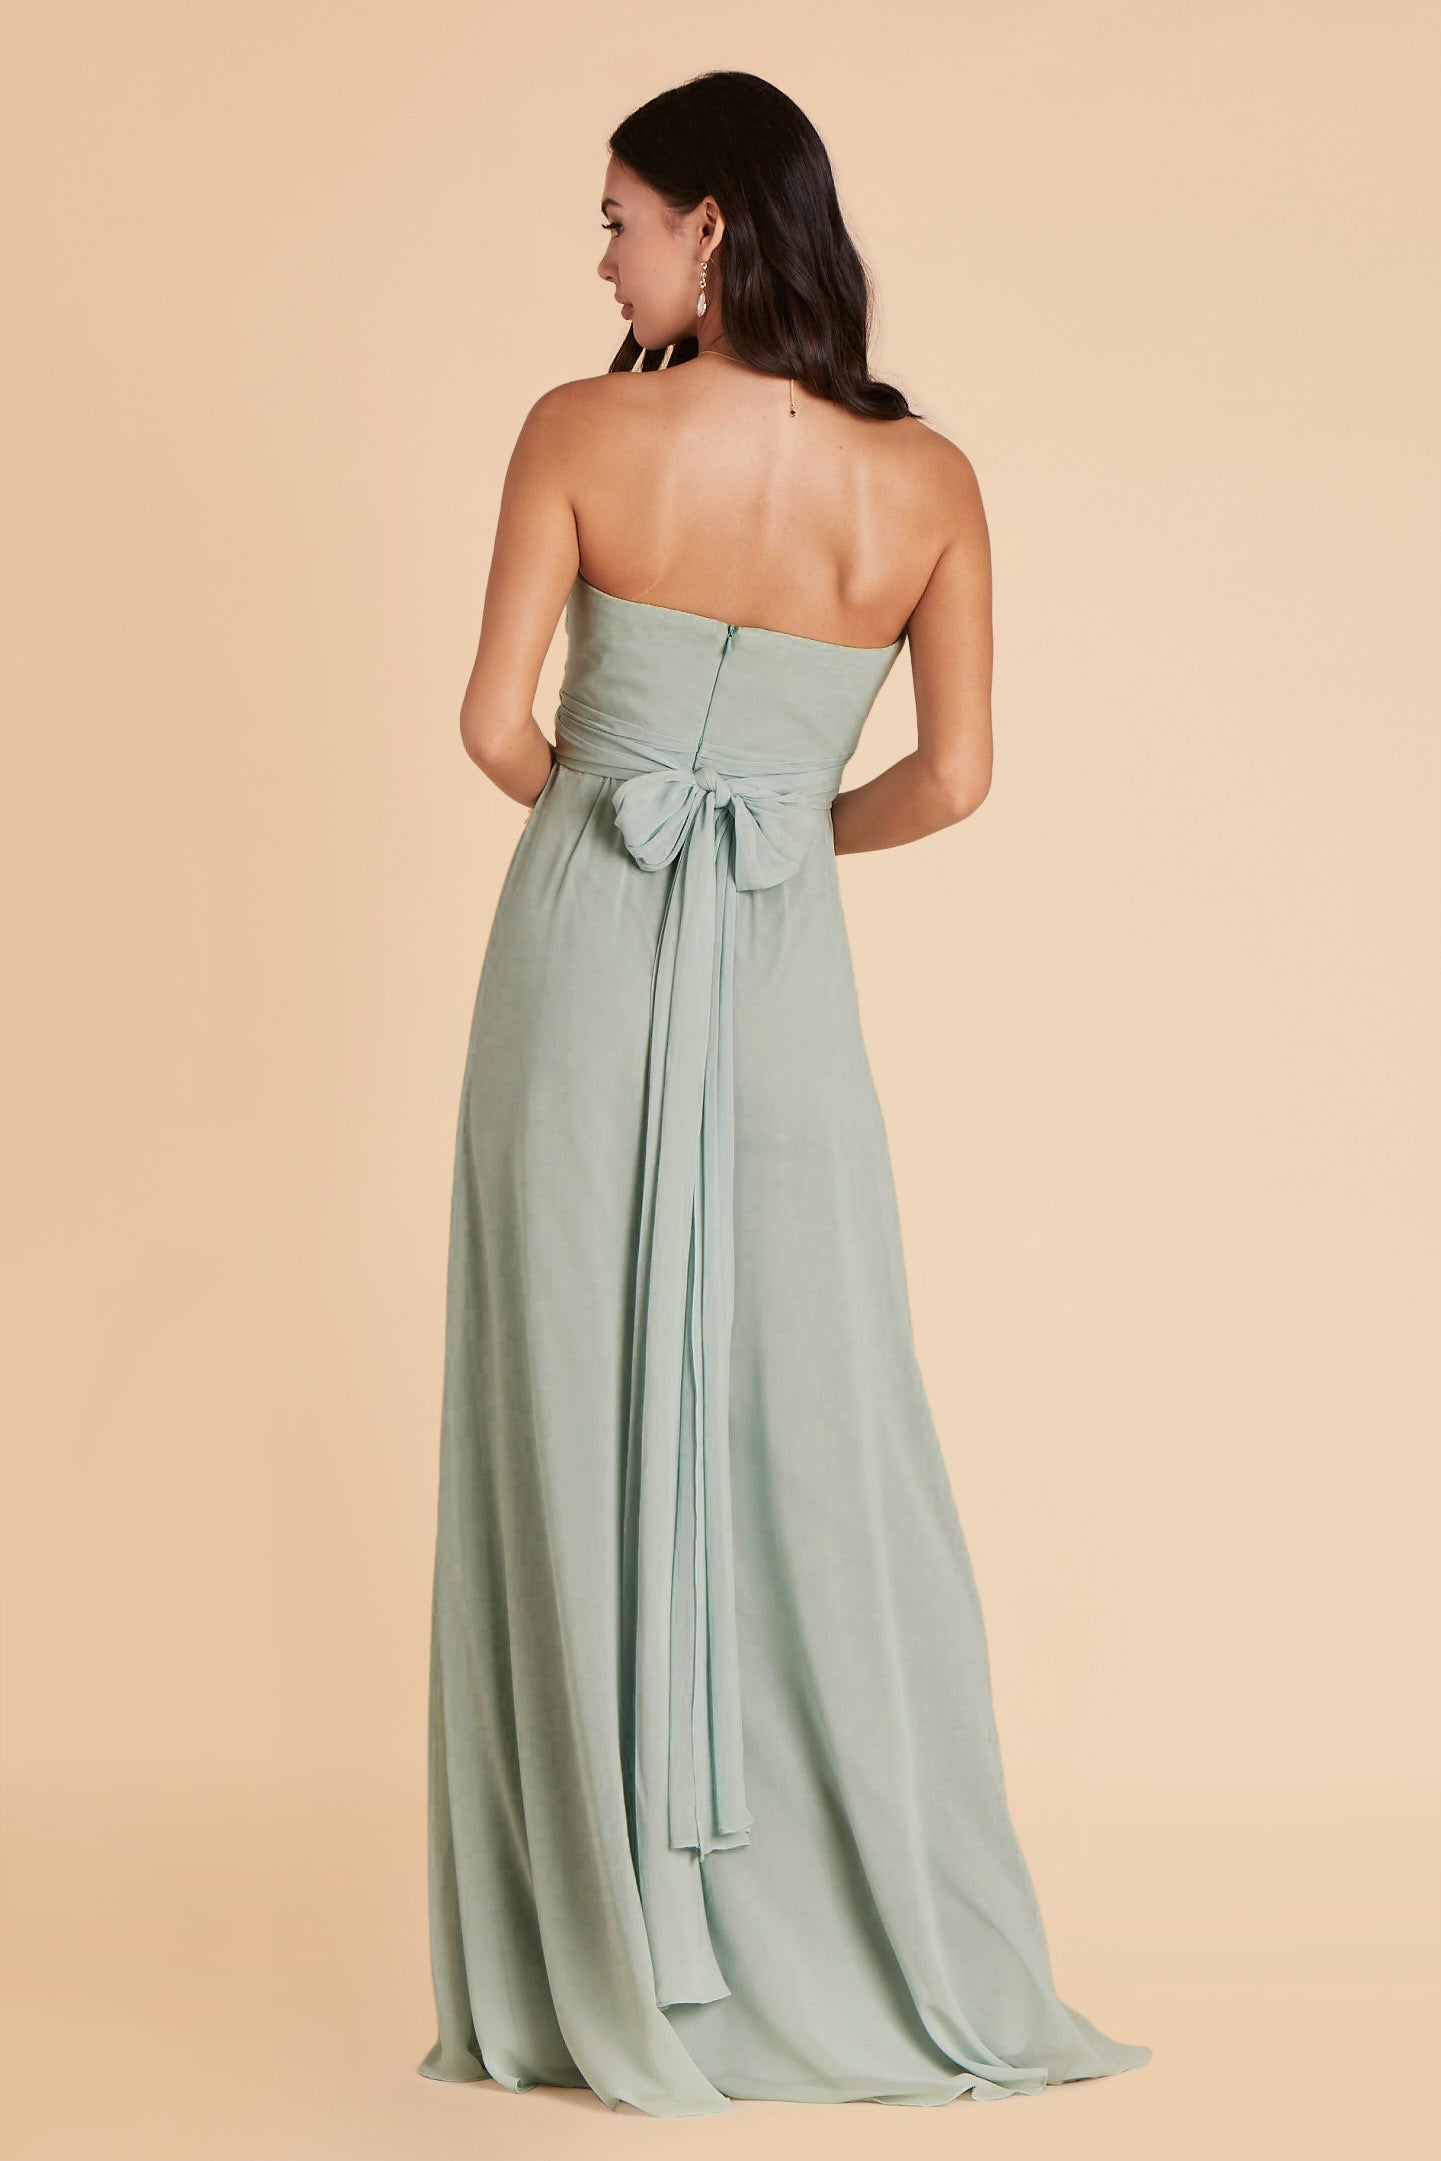 Back view of the Grace Convertible Bridesmaid Dress in sage chiffon reveals an open back cut below the shoulder blades with front streamers tied around the waist in a delicate and flowing bow.